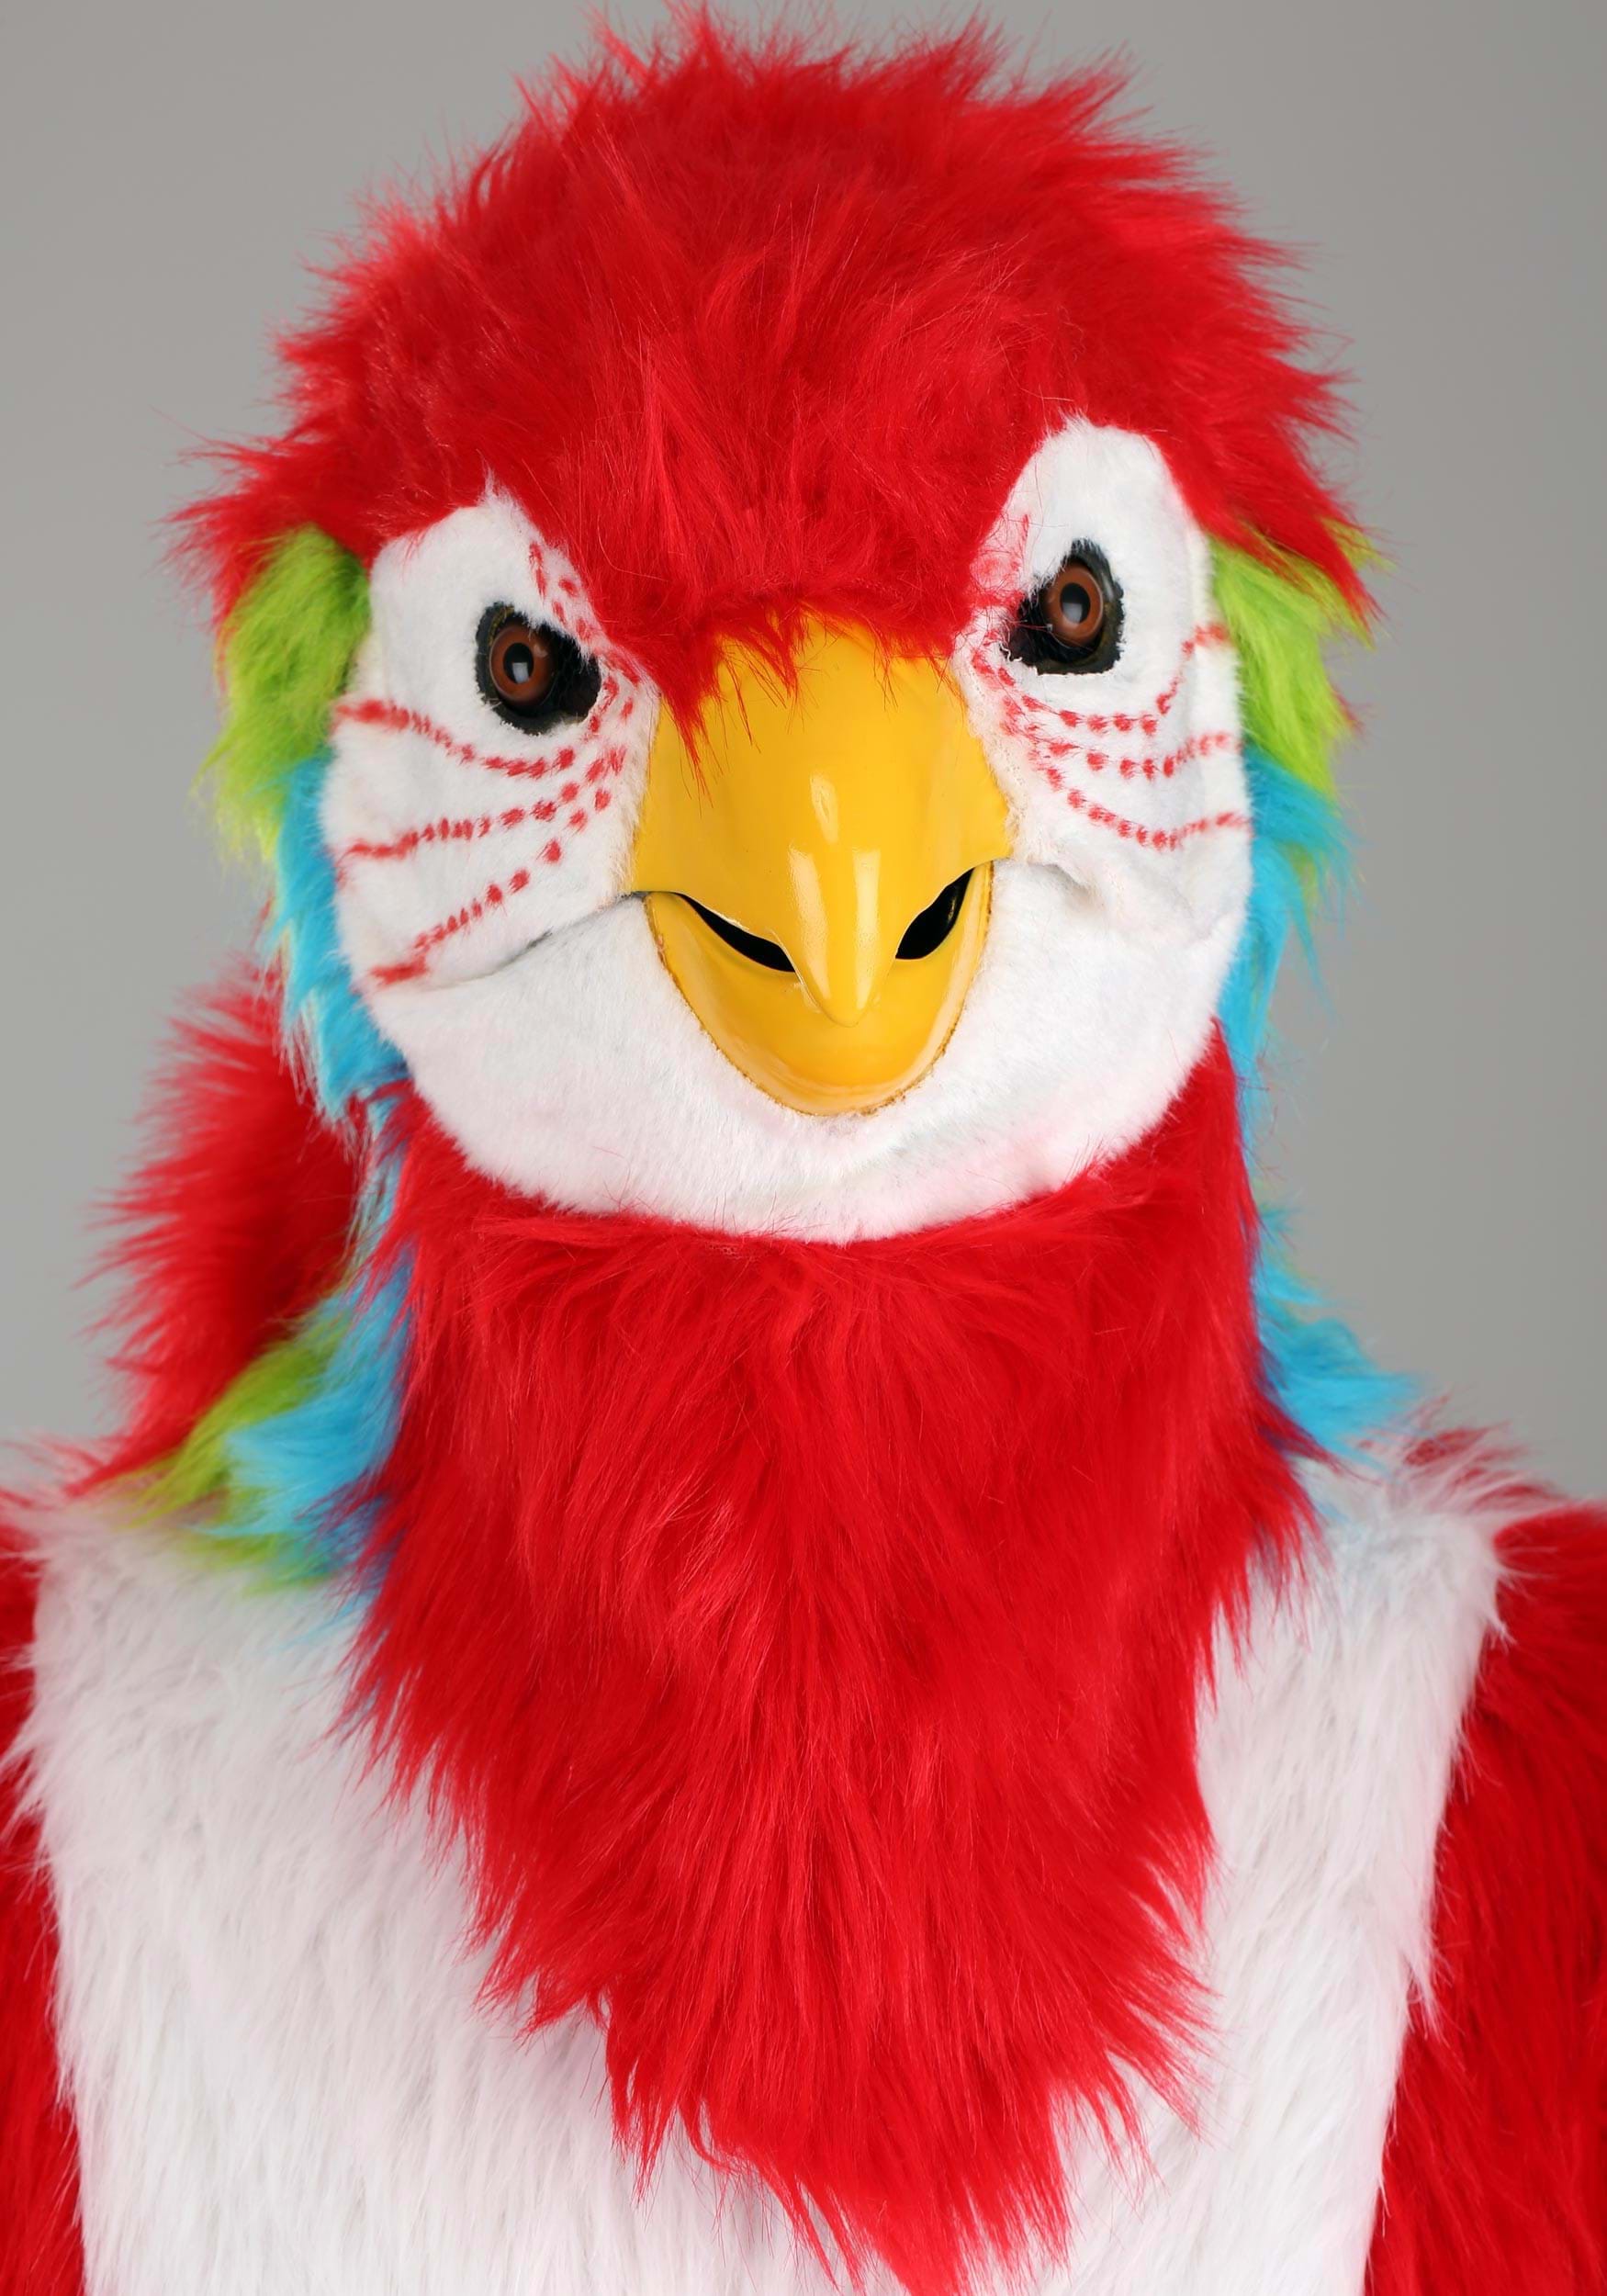 Parrot Mascot Costume For Adults